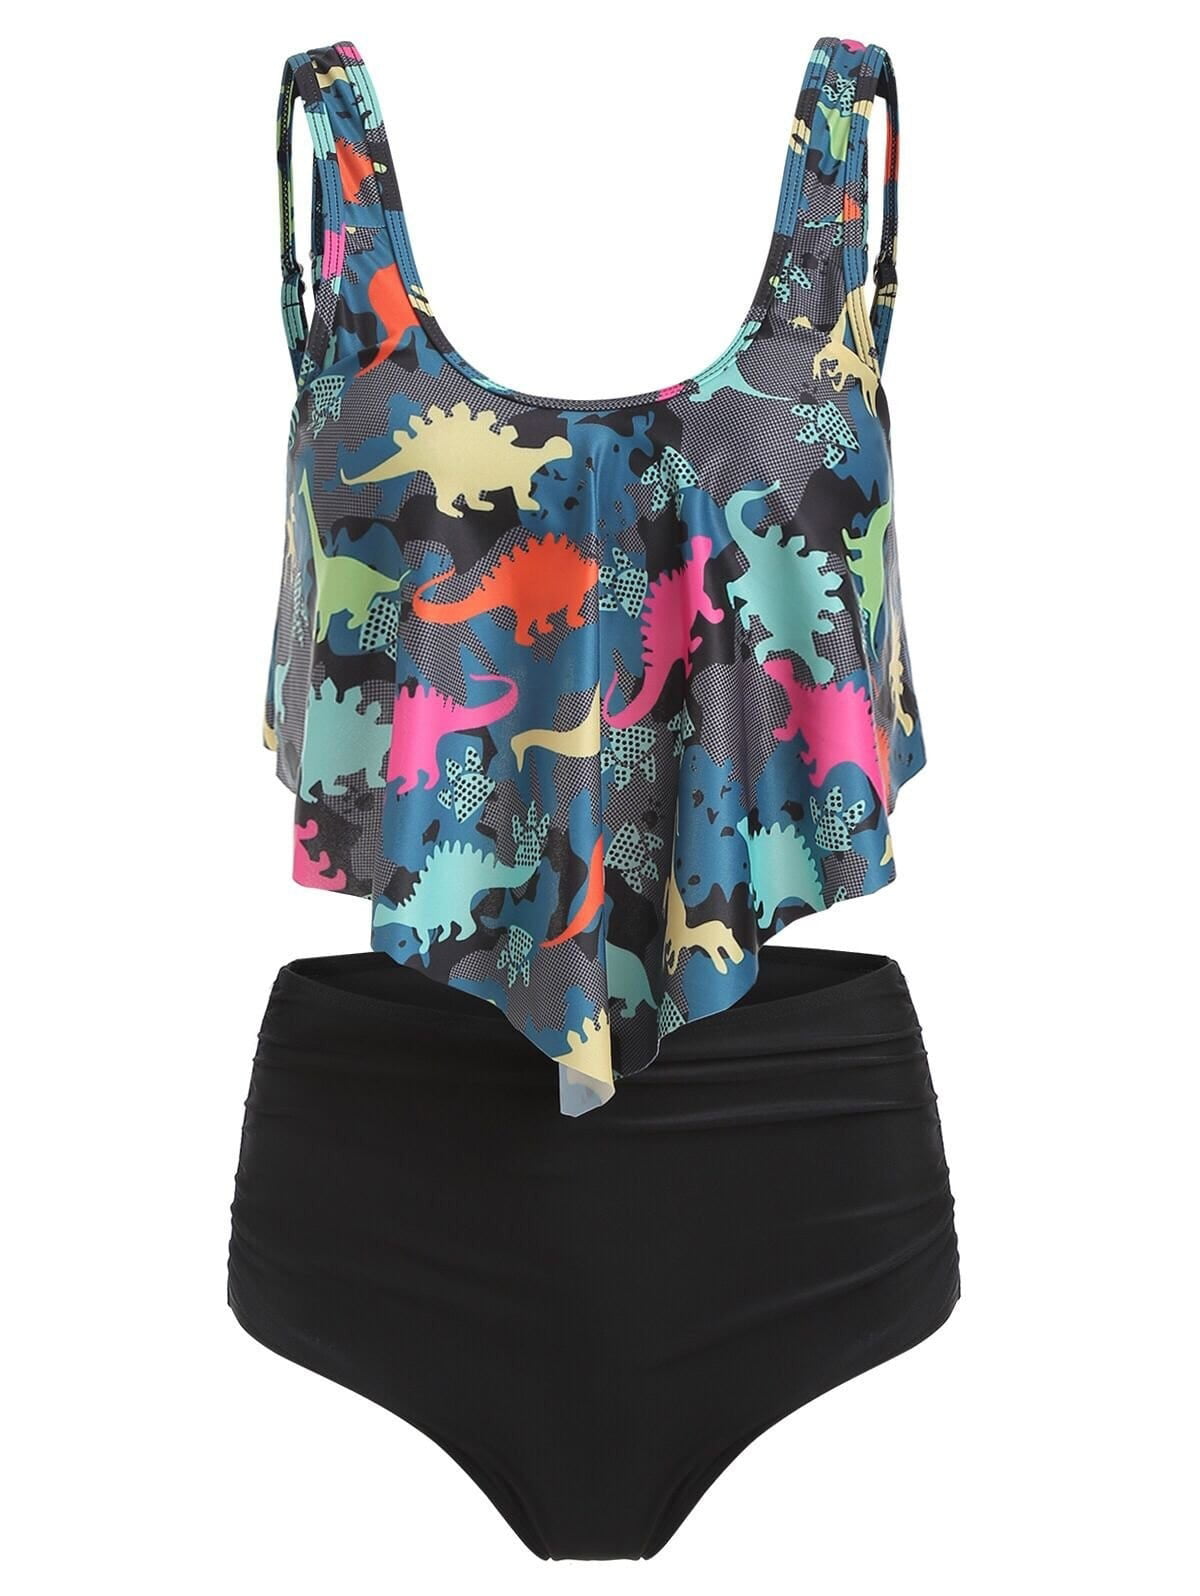 Thenxin Swimsuits for Women Dinosaur Print Two Piece Bathing Suits Flounce Ruffled Top with High Waisted Bottom Tankini